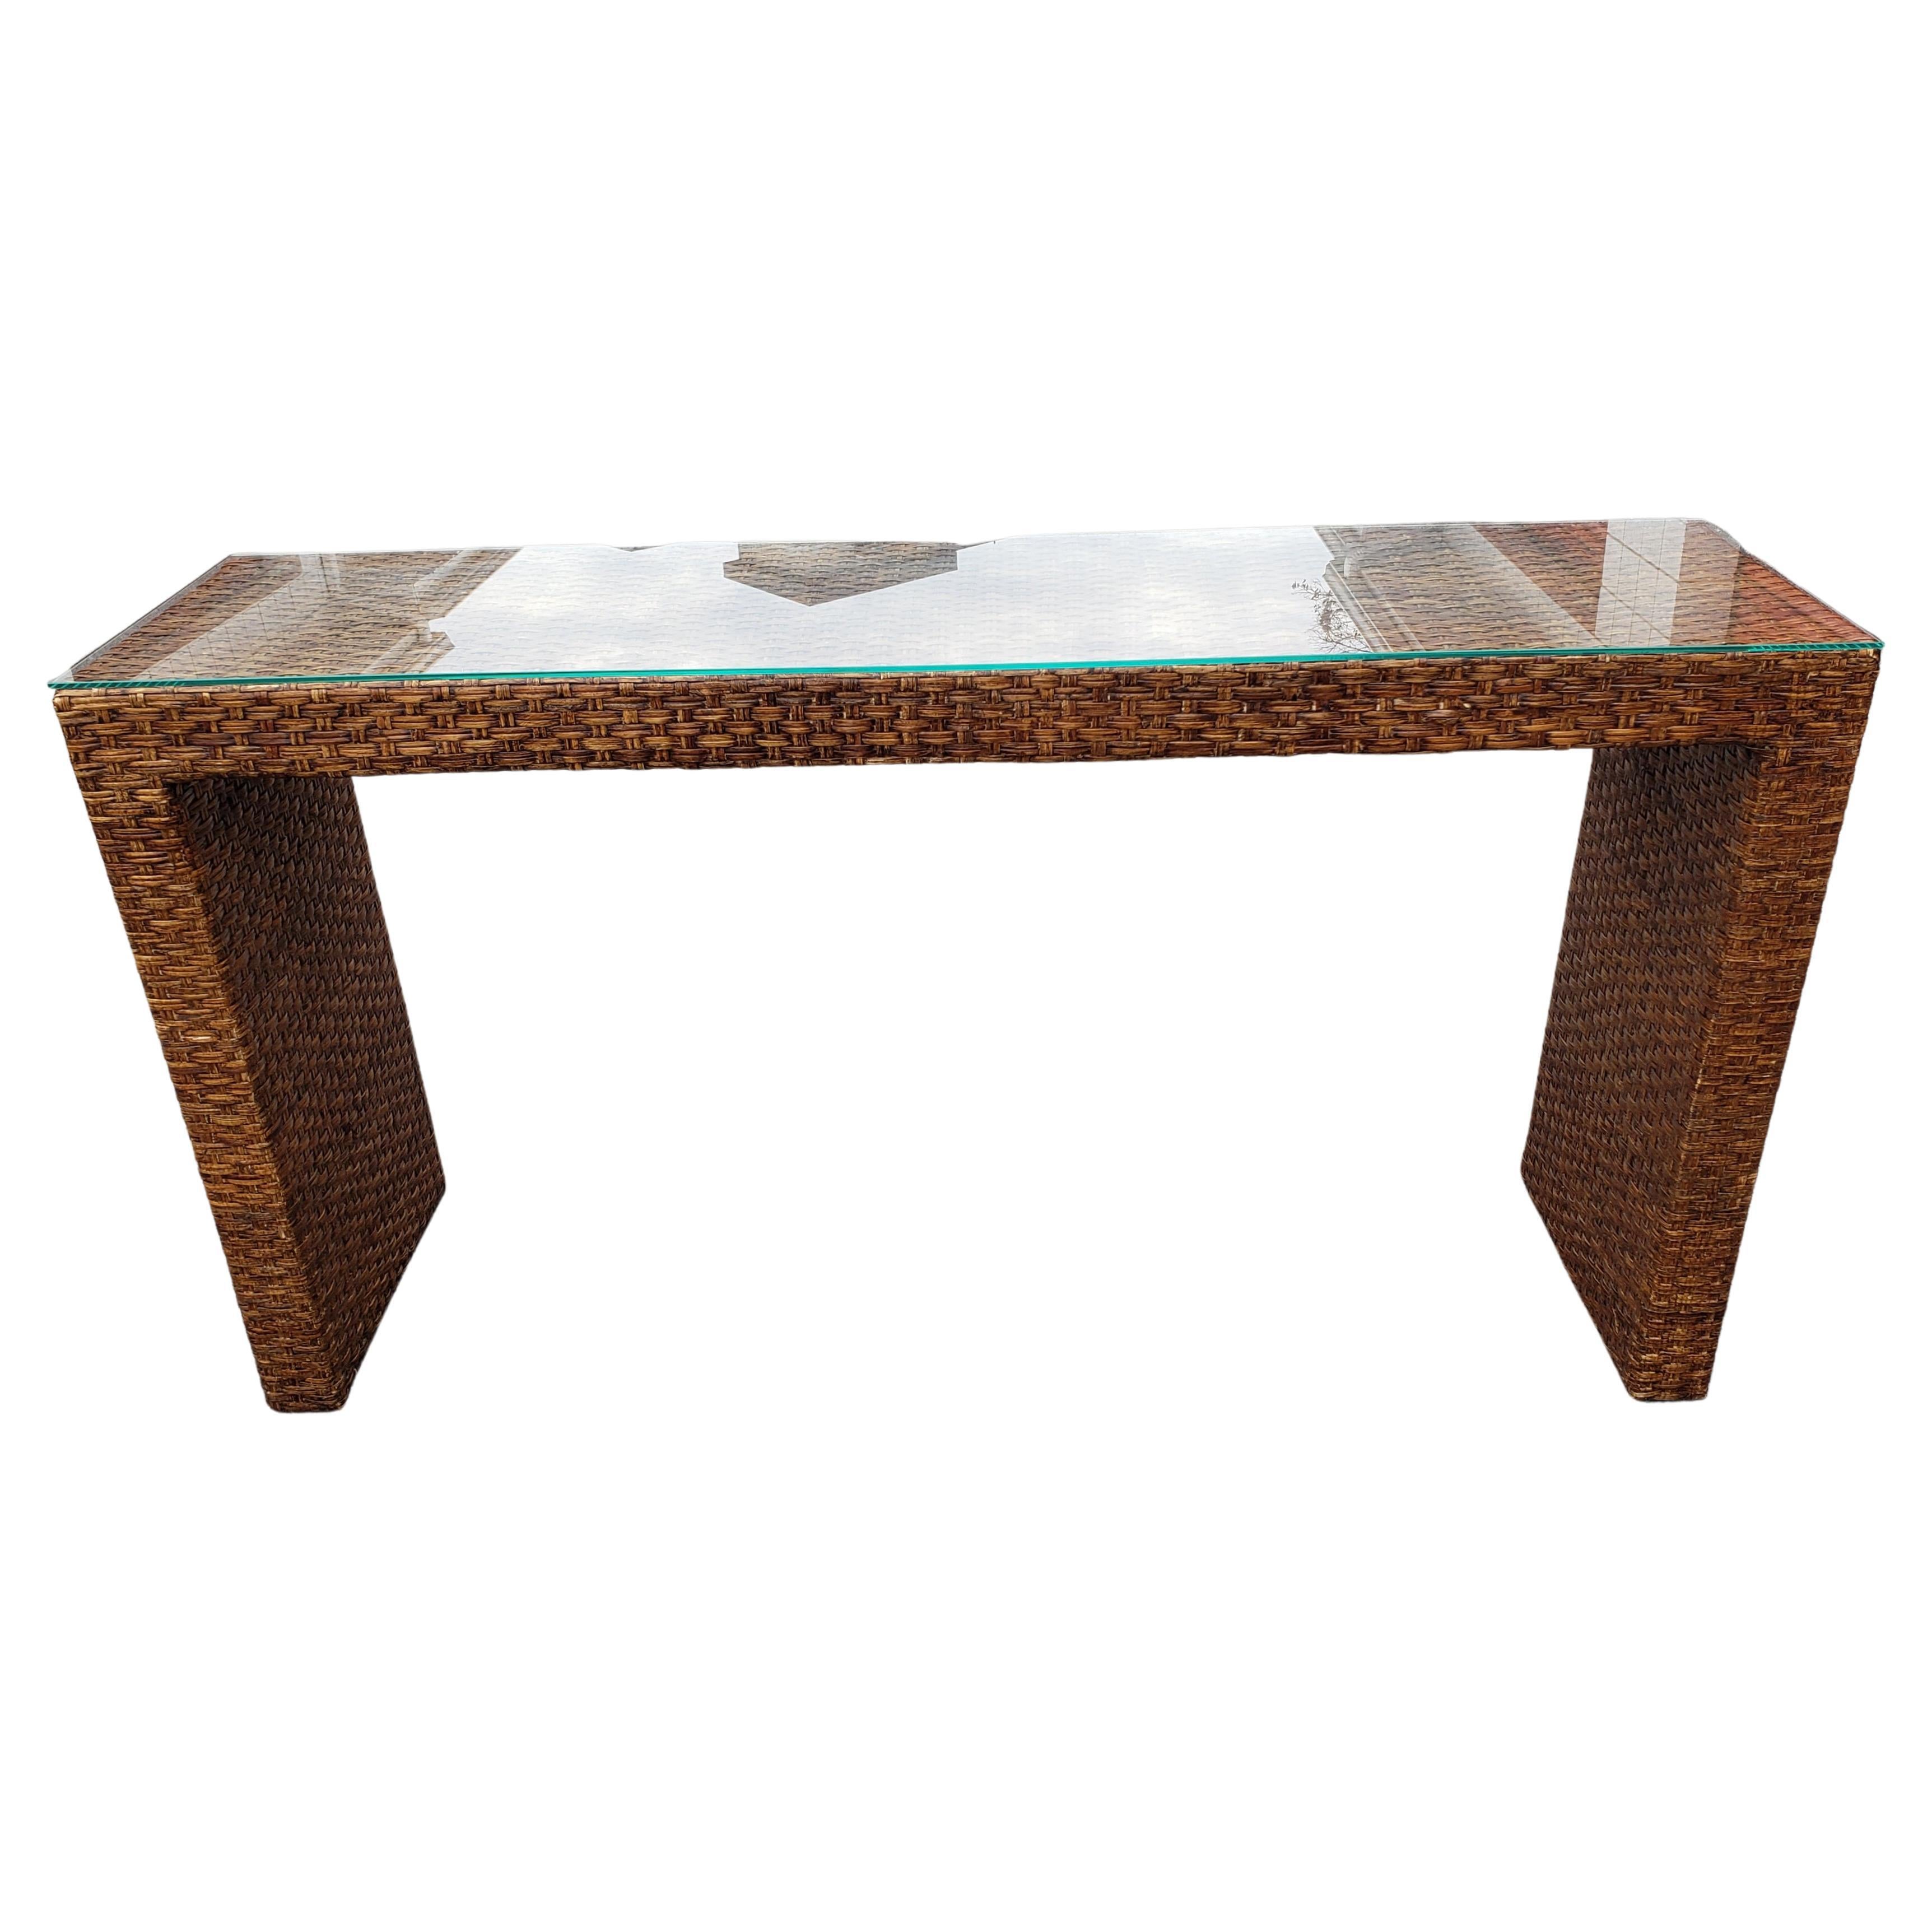 Hand-Crafted Woven Wicker Parsons Style Console Table Sofa Table with Glass Top, Circa 1980s